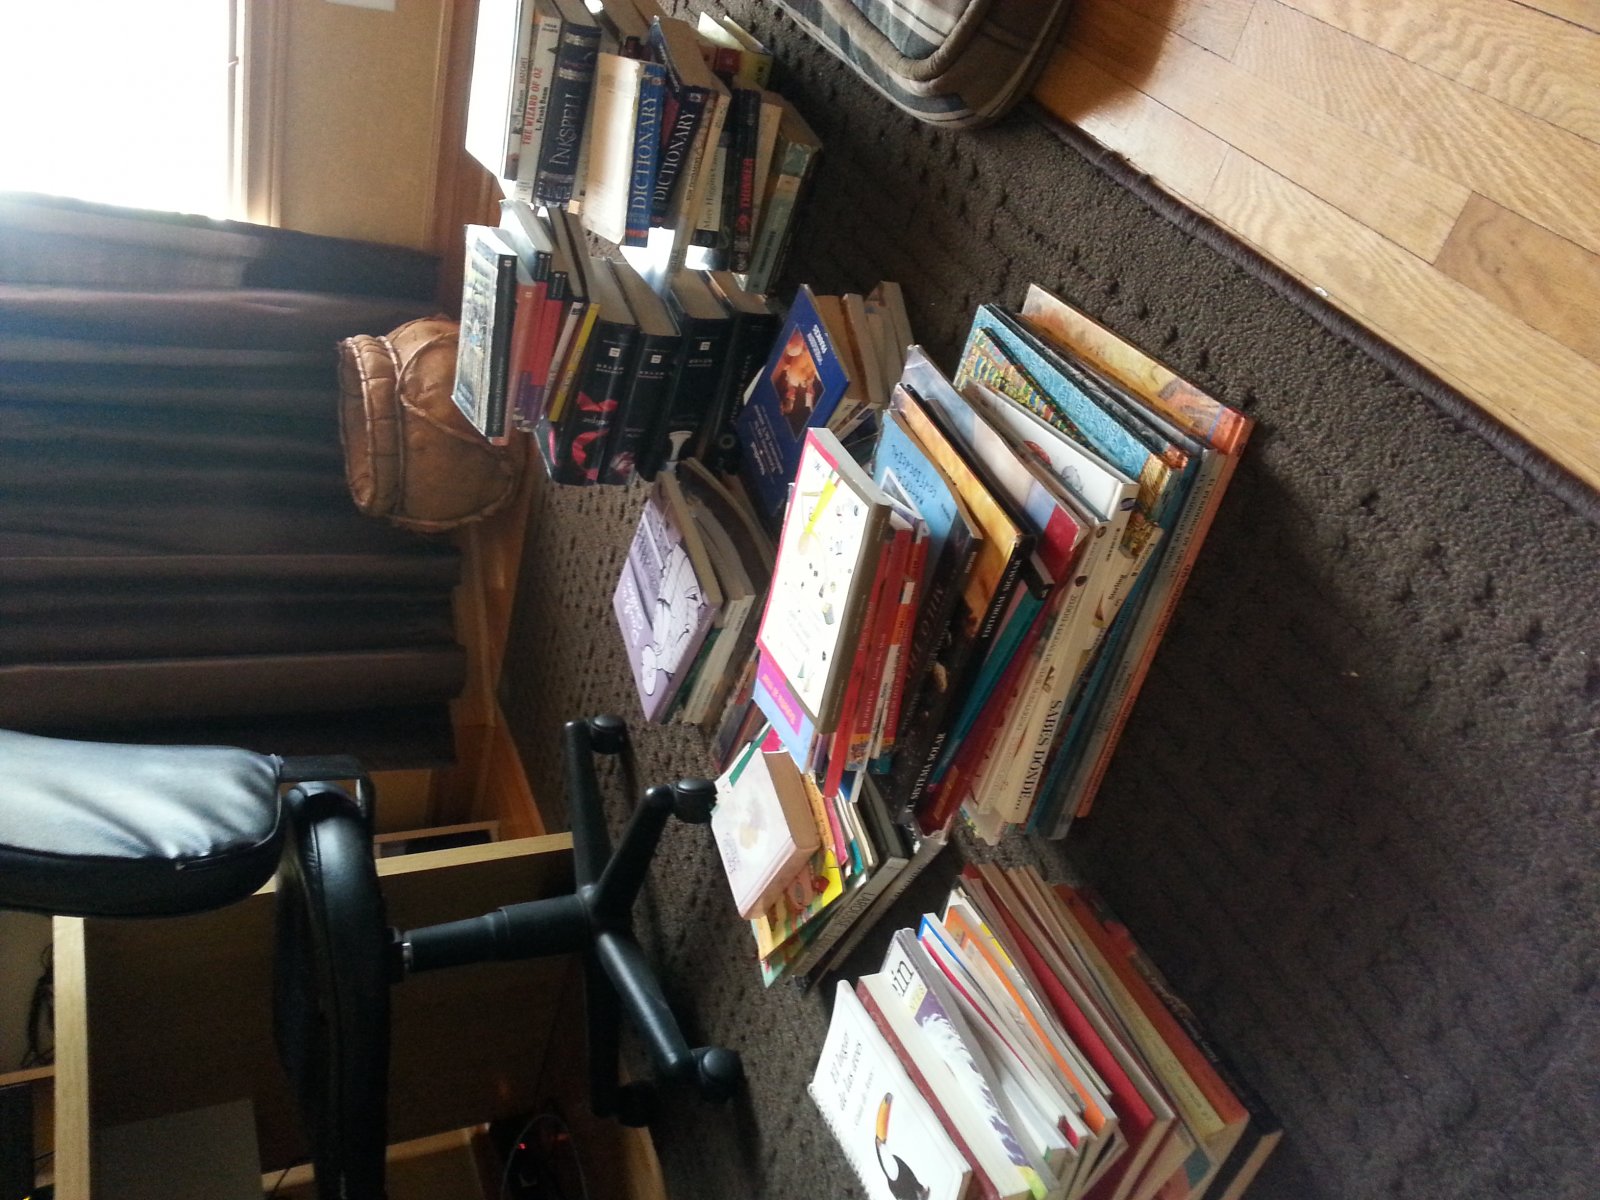 Books to be donated...